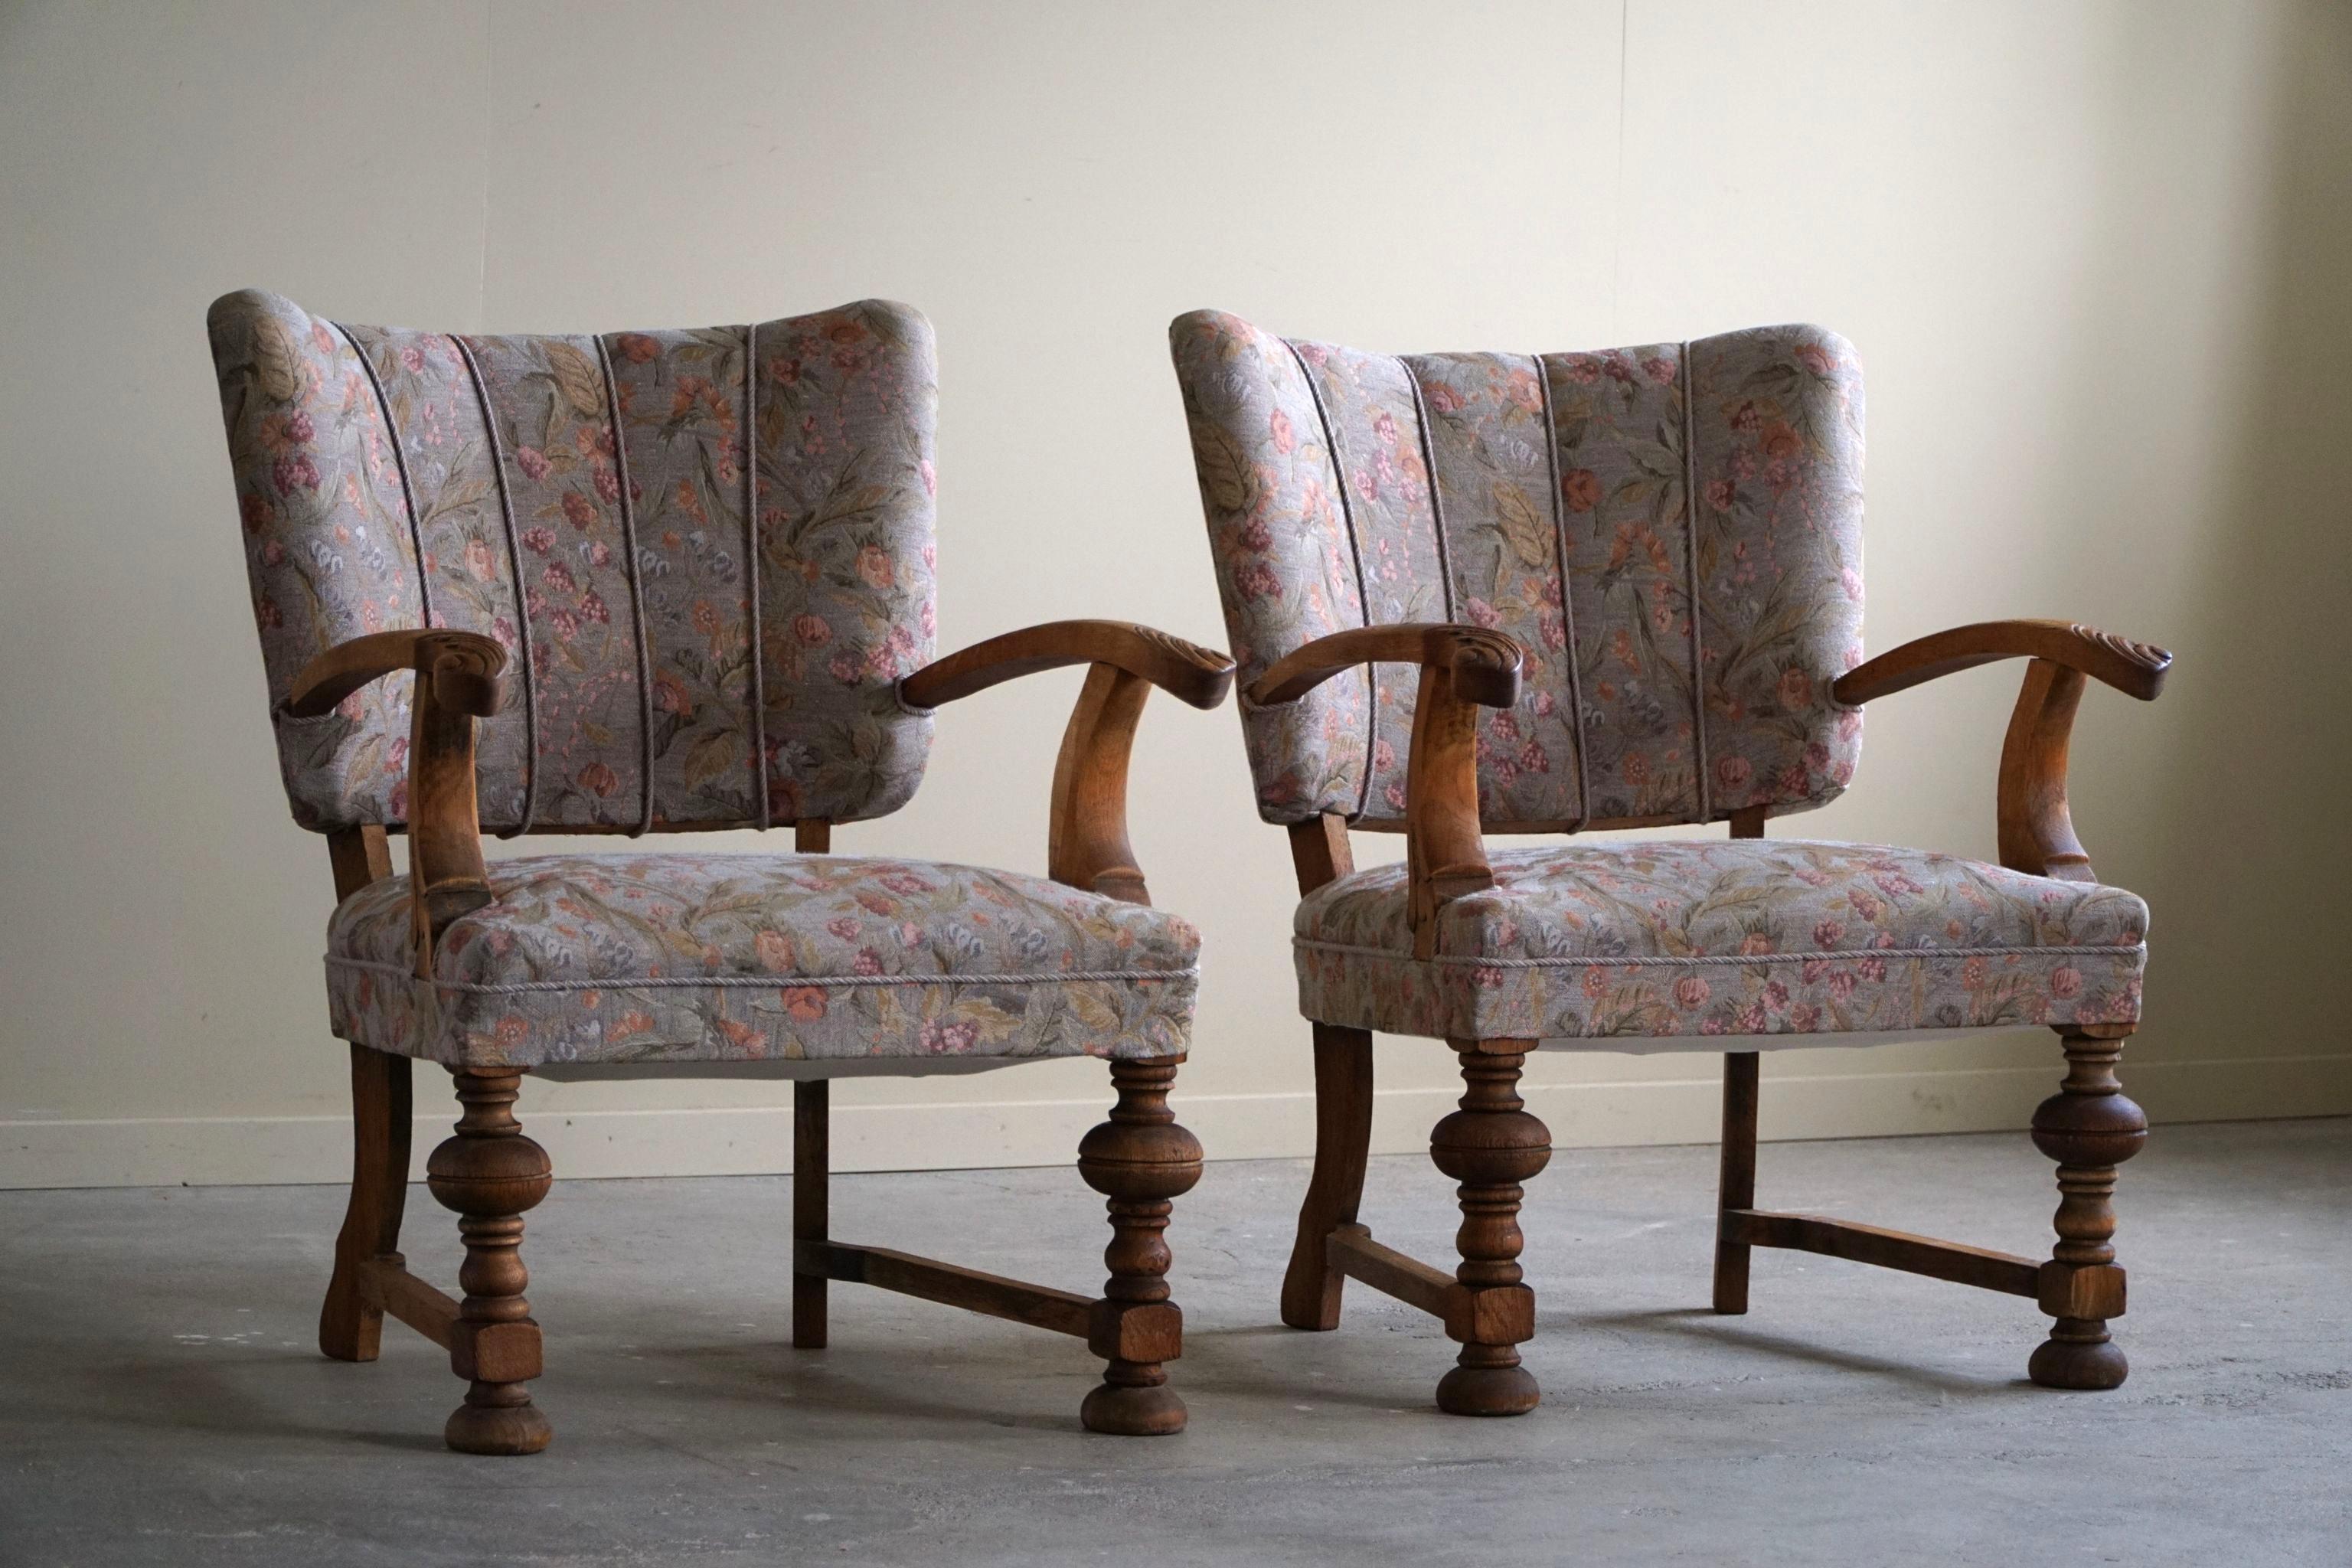 Fabric A Pair of Armchairs, By a Danish Cabinetmaker, Art Nouveau, Early 20th Century For Sale